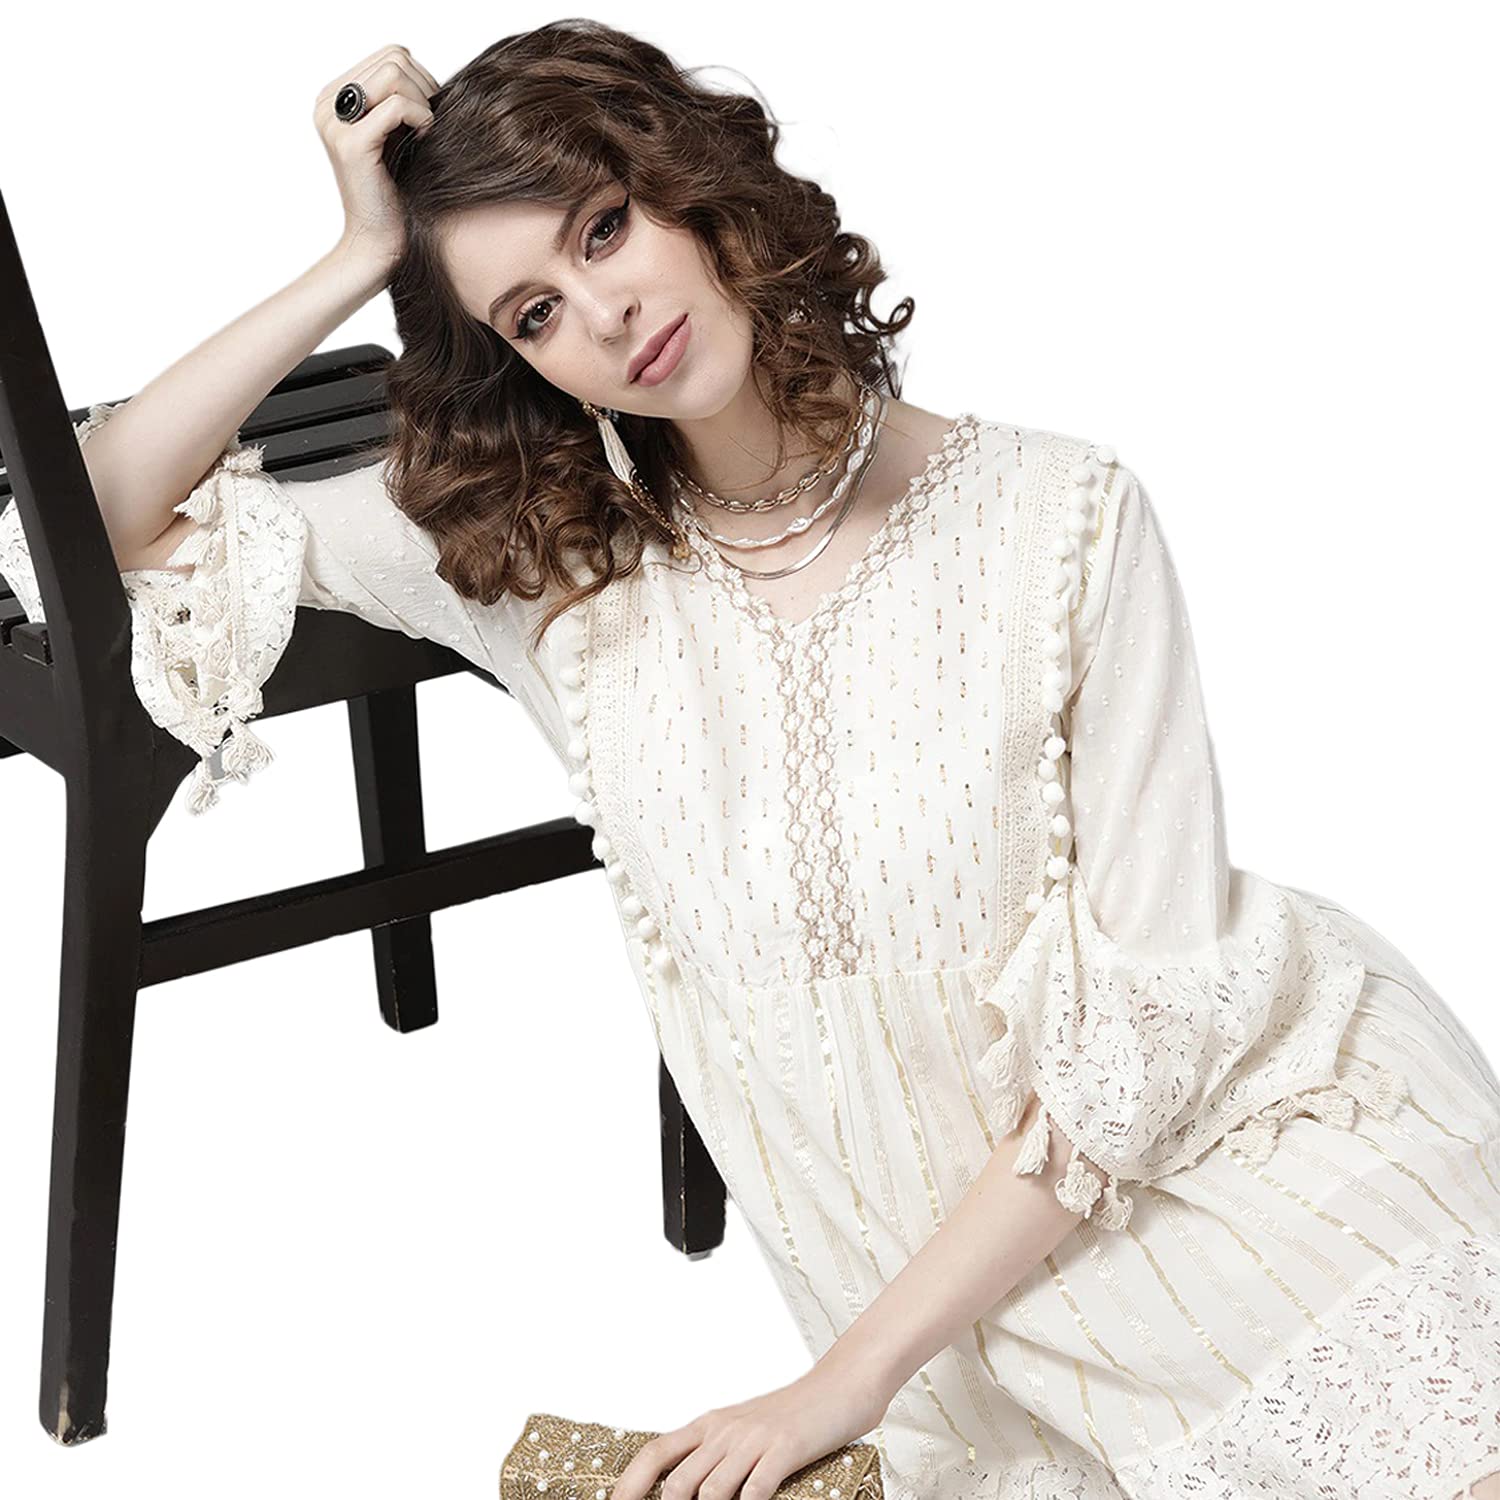 Urban Wardrobe's Off White Ethnic Motifs Fit and Flare Dress